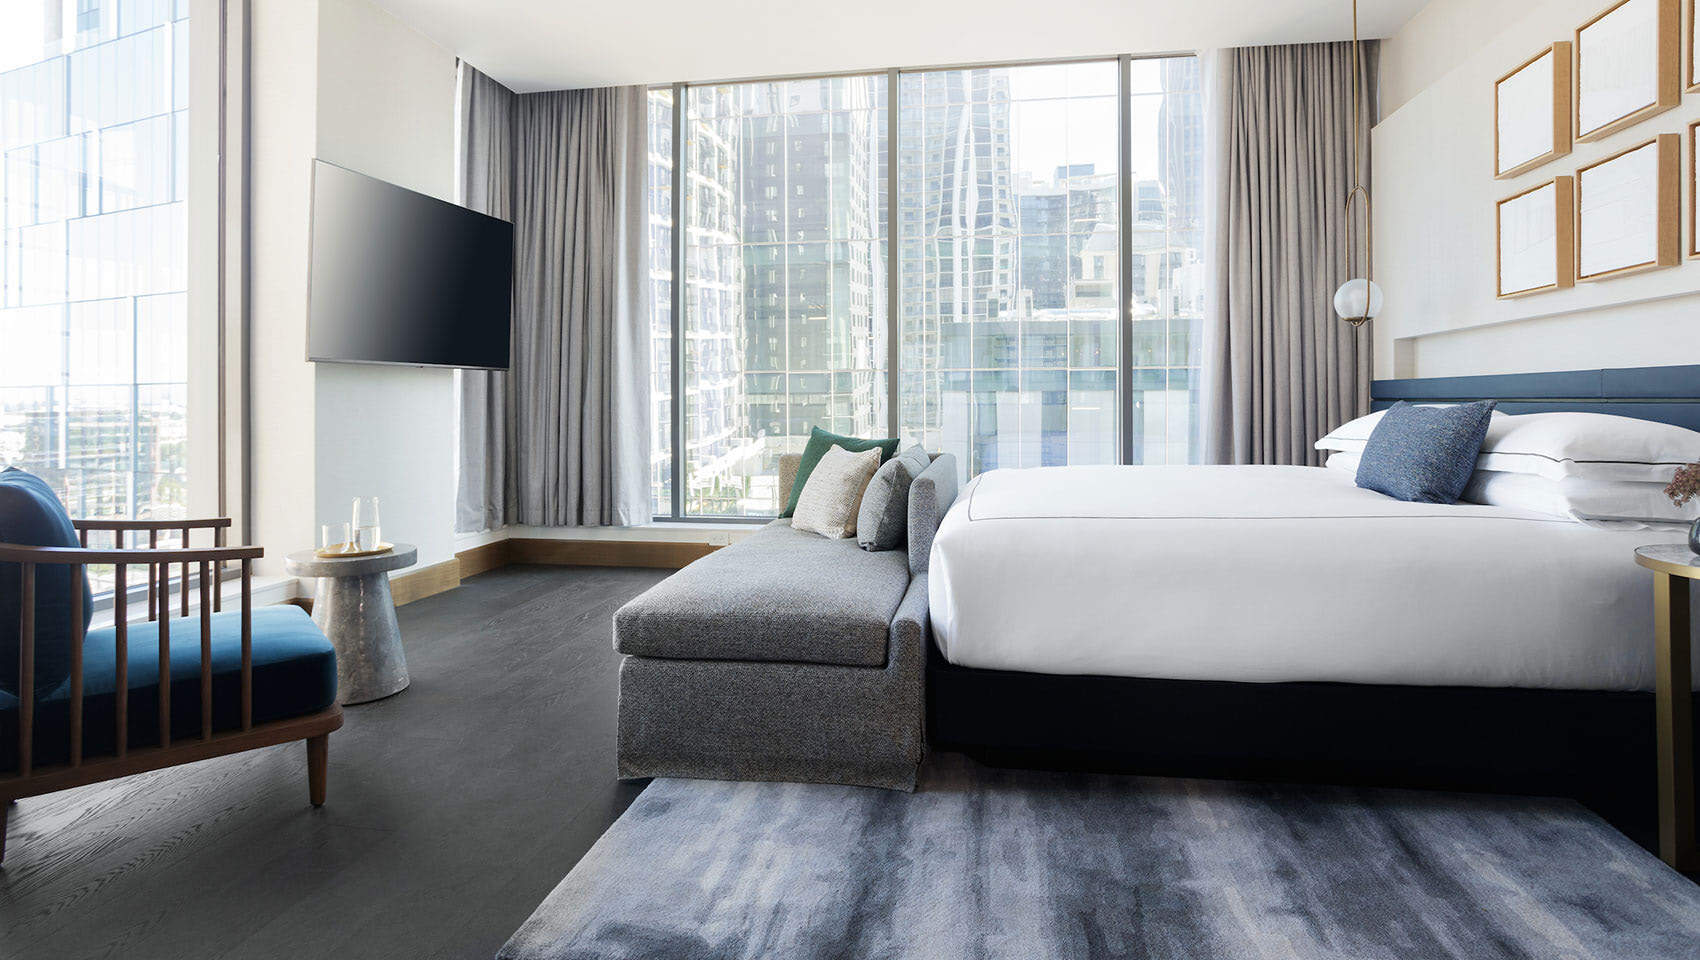 ROH New Hotel Openings: A room at the Kimpton Shane Hotel